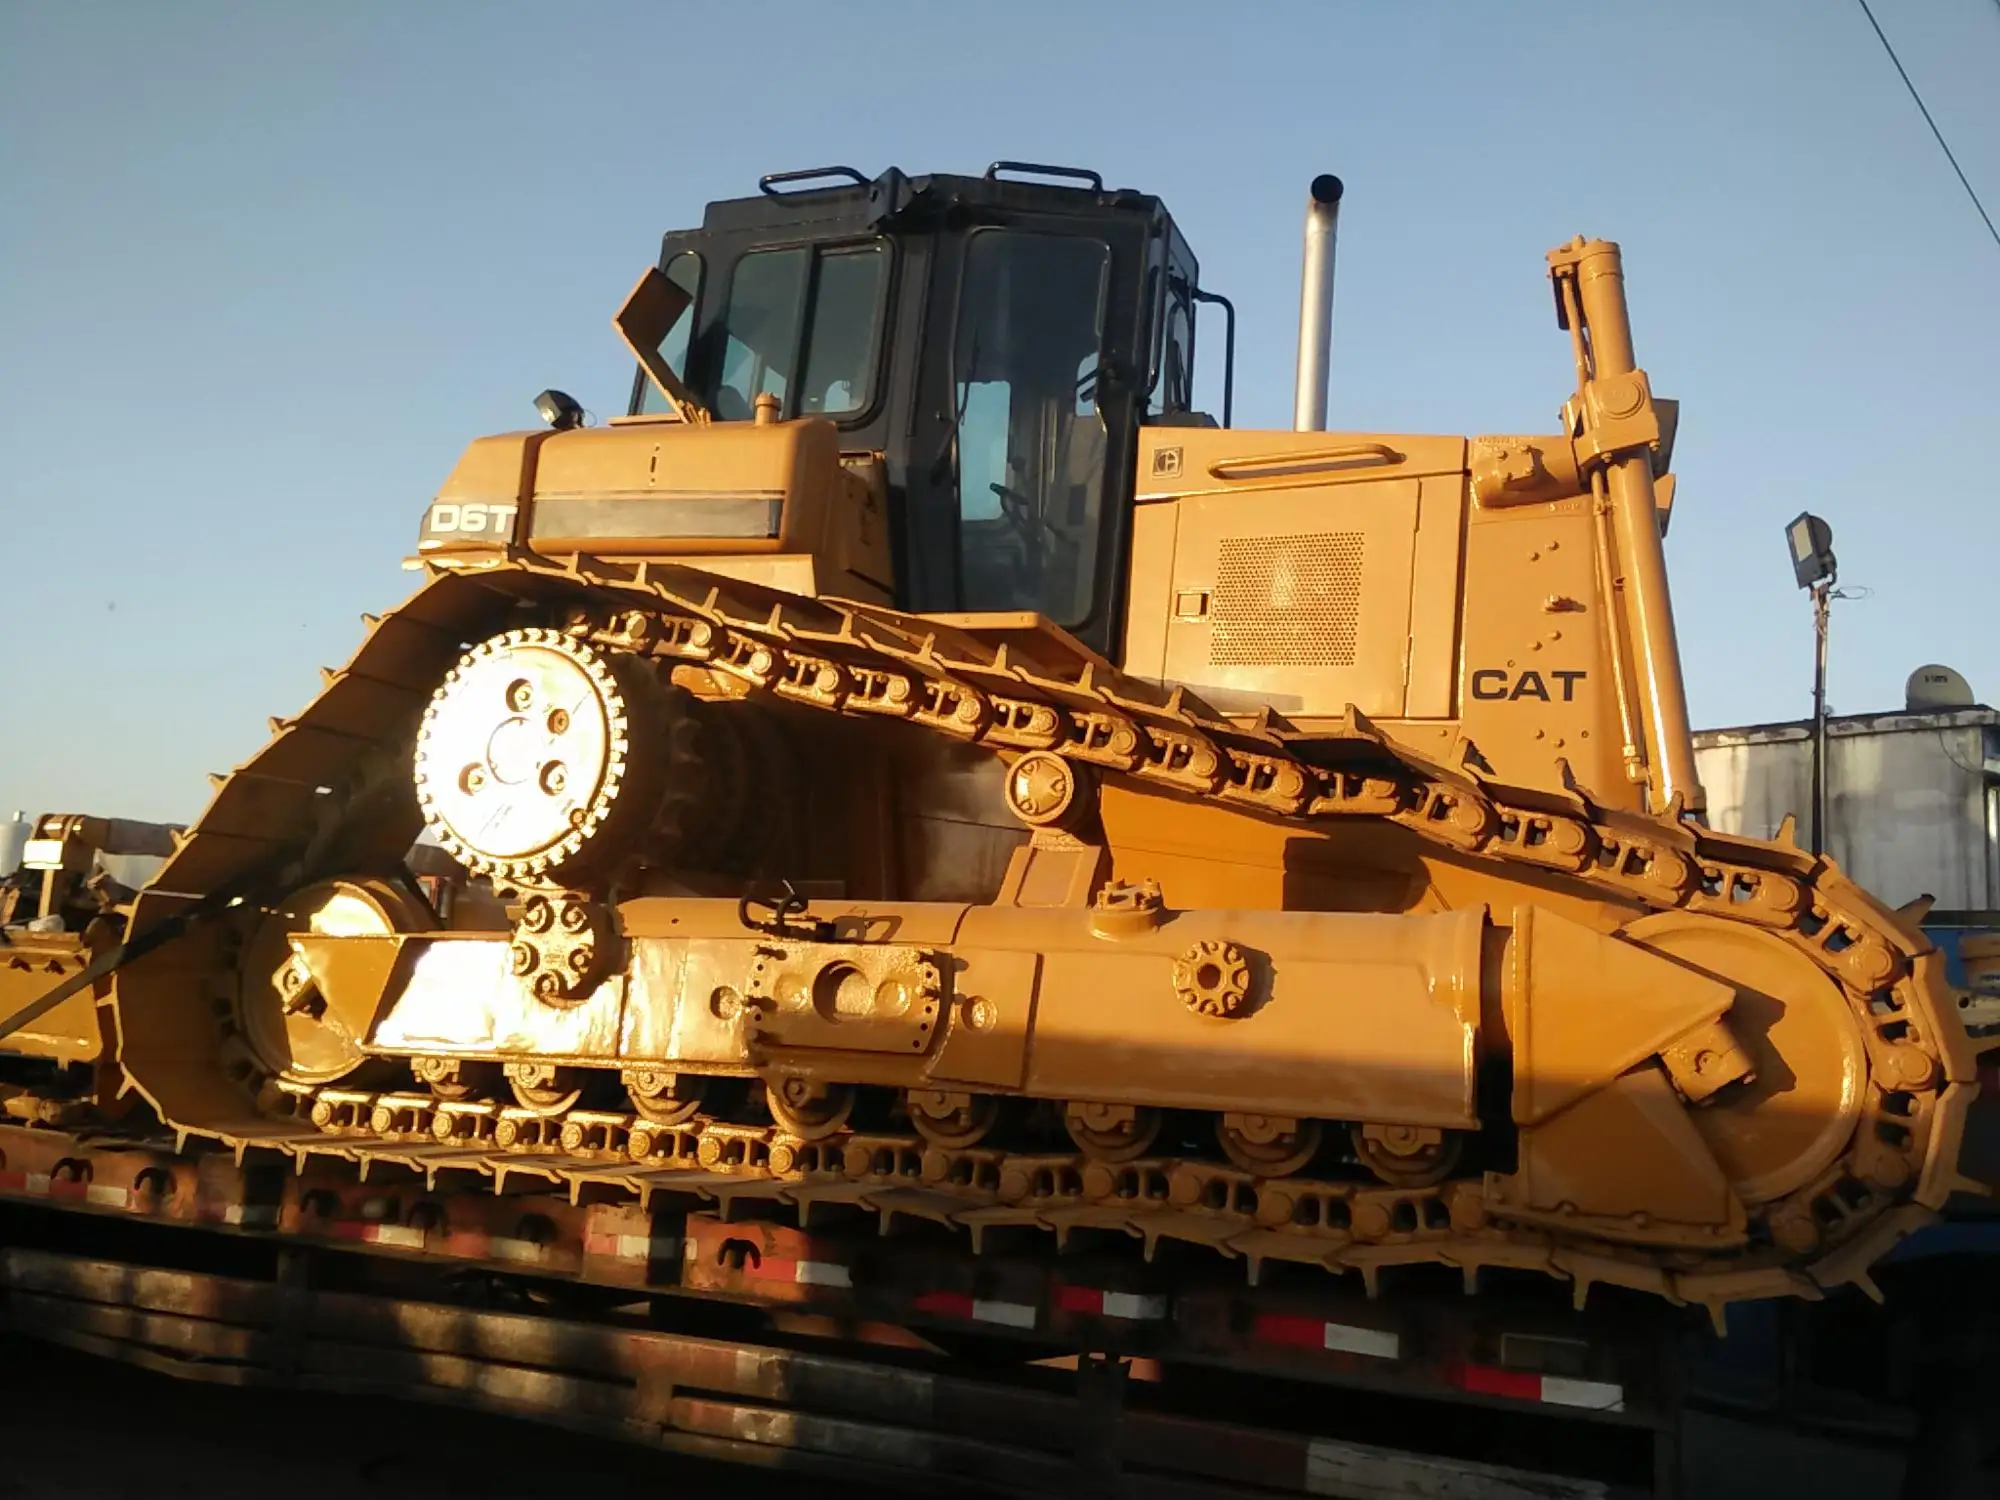 Used D6t Bulldozer,Used Bulldozer D6 D6h D6r D6t For Sale - Buy Used ...